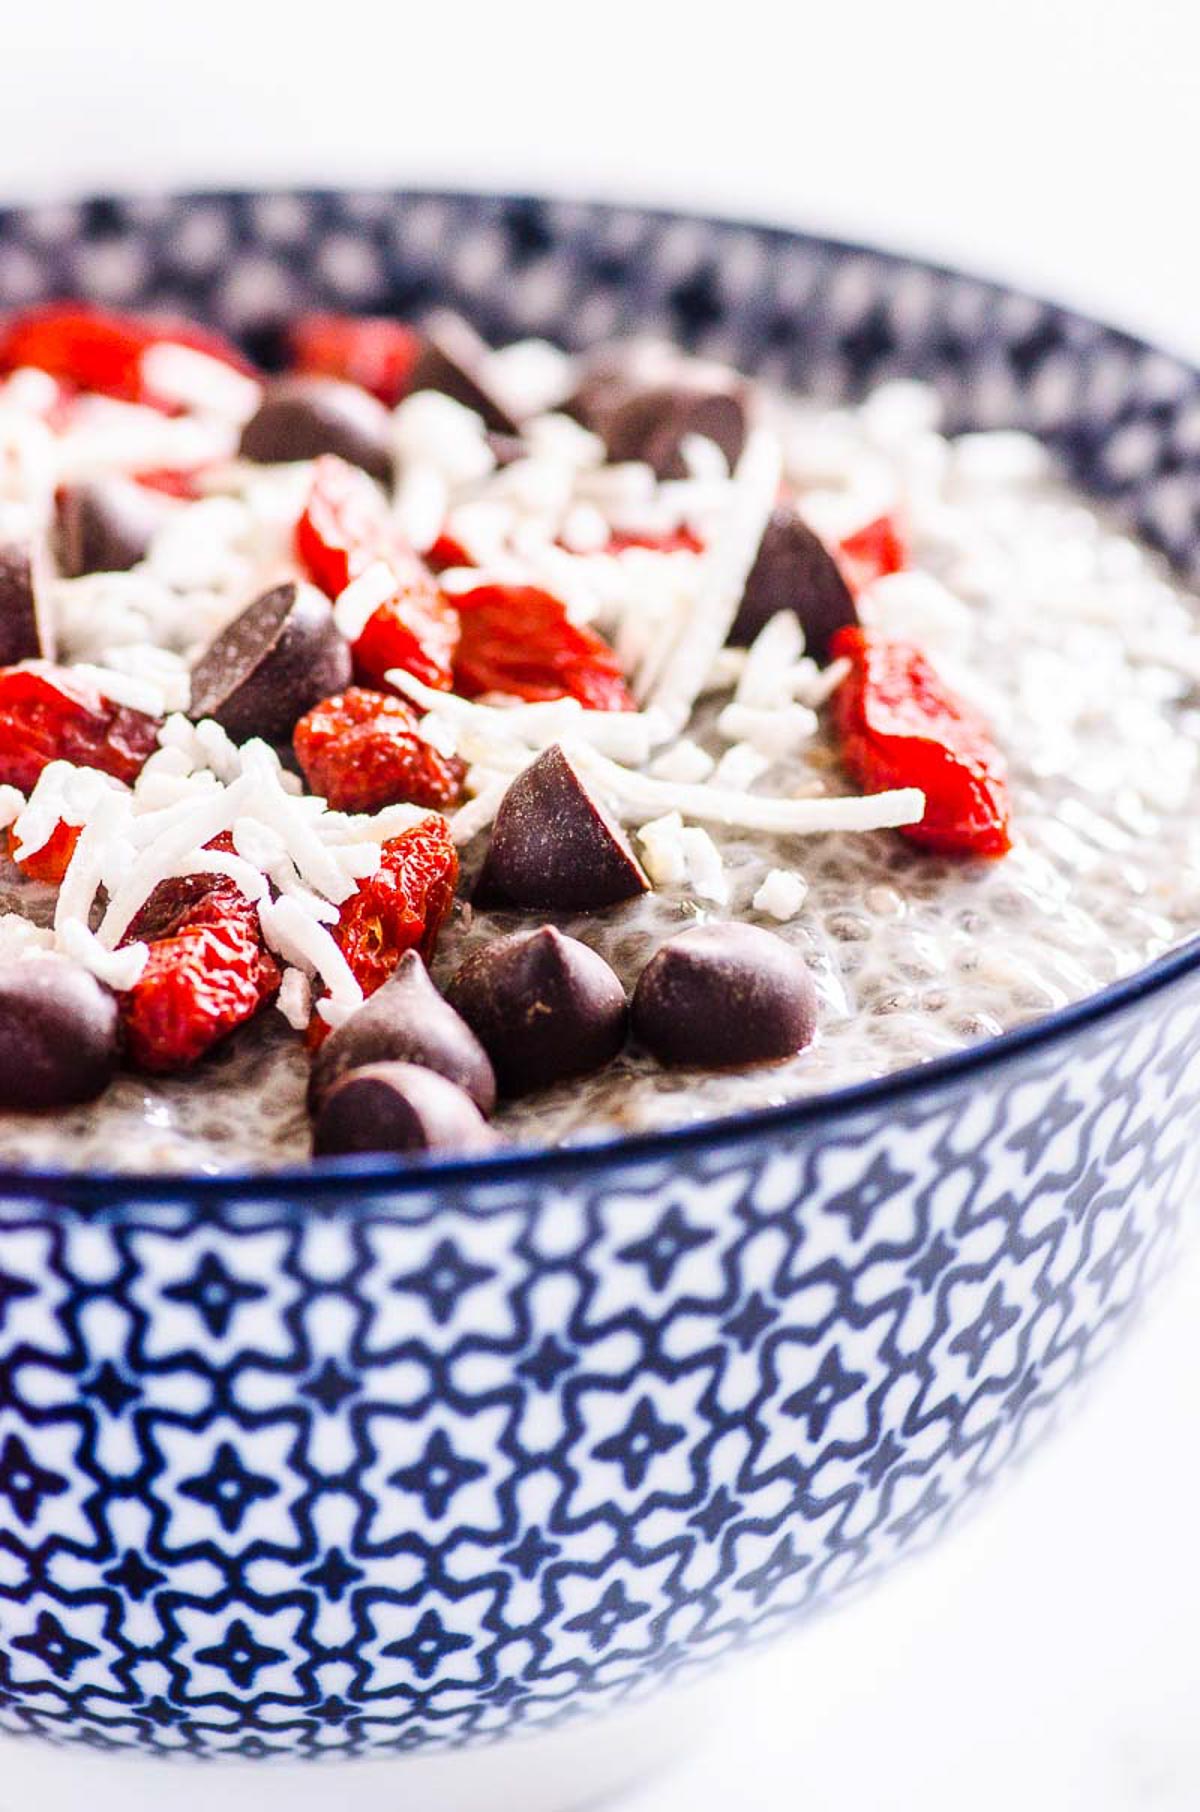 Chia seed pudding in blue and white bowl with toppings.